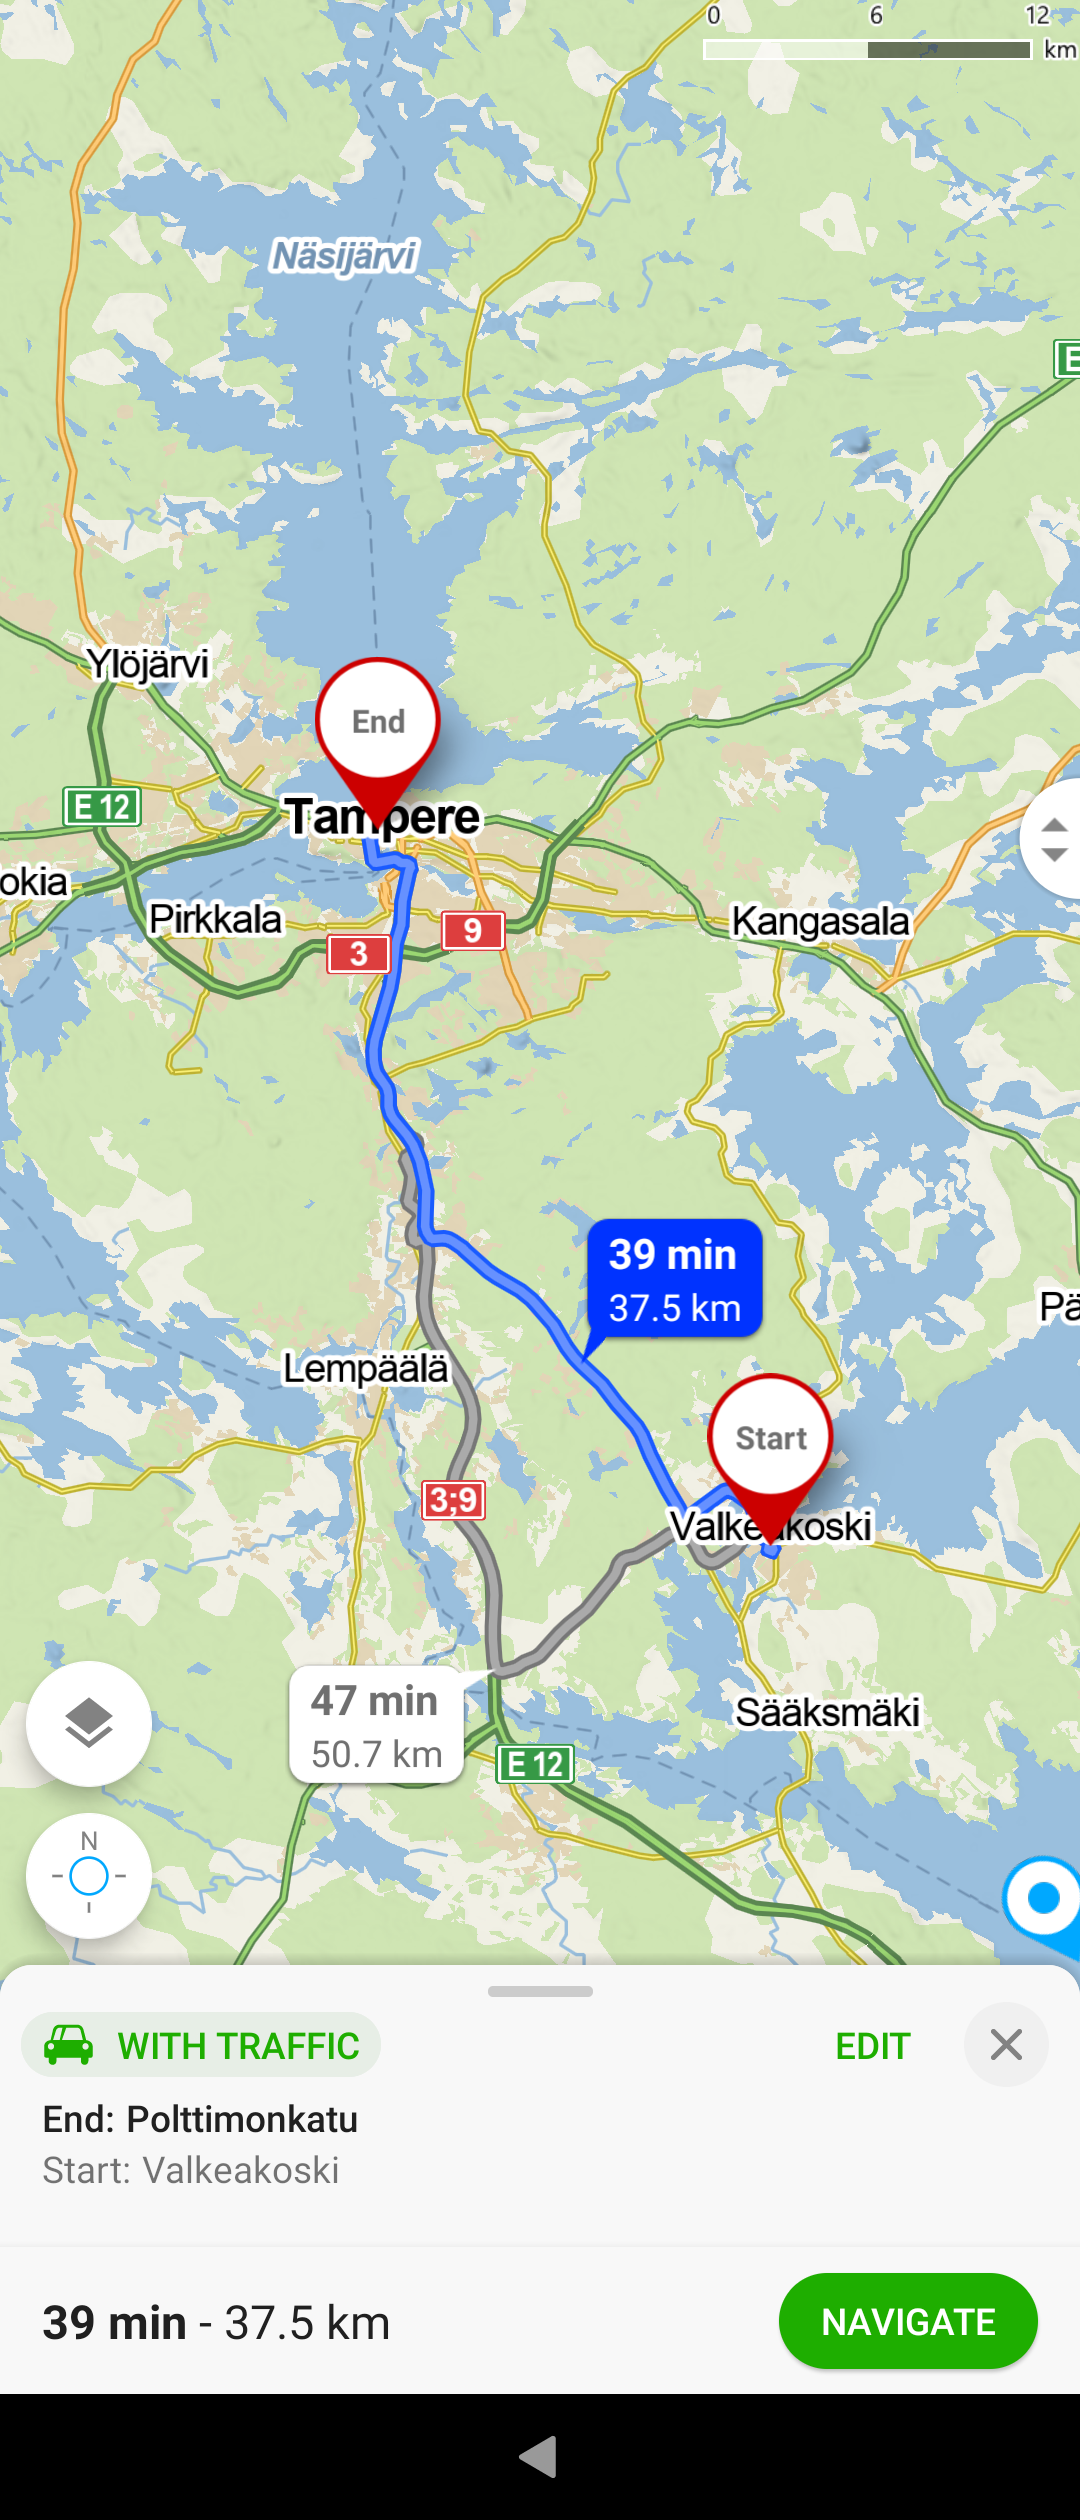 Route to Tampere